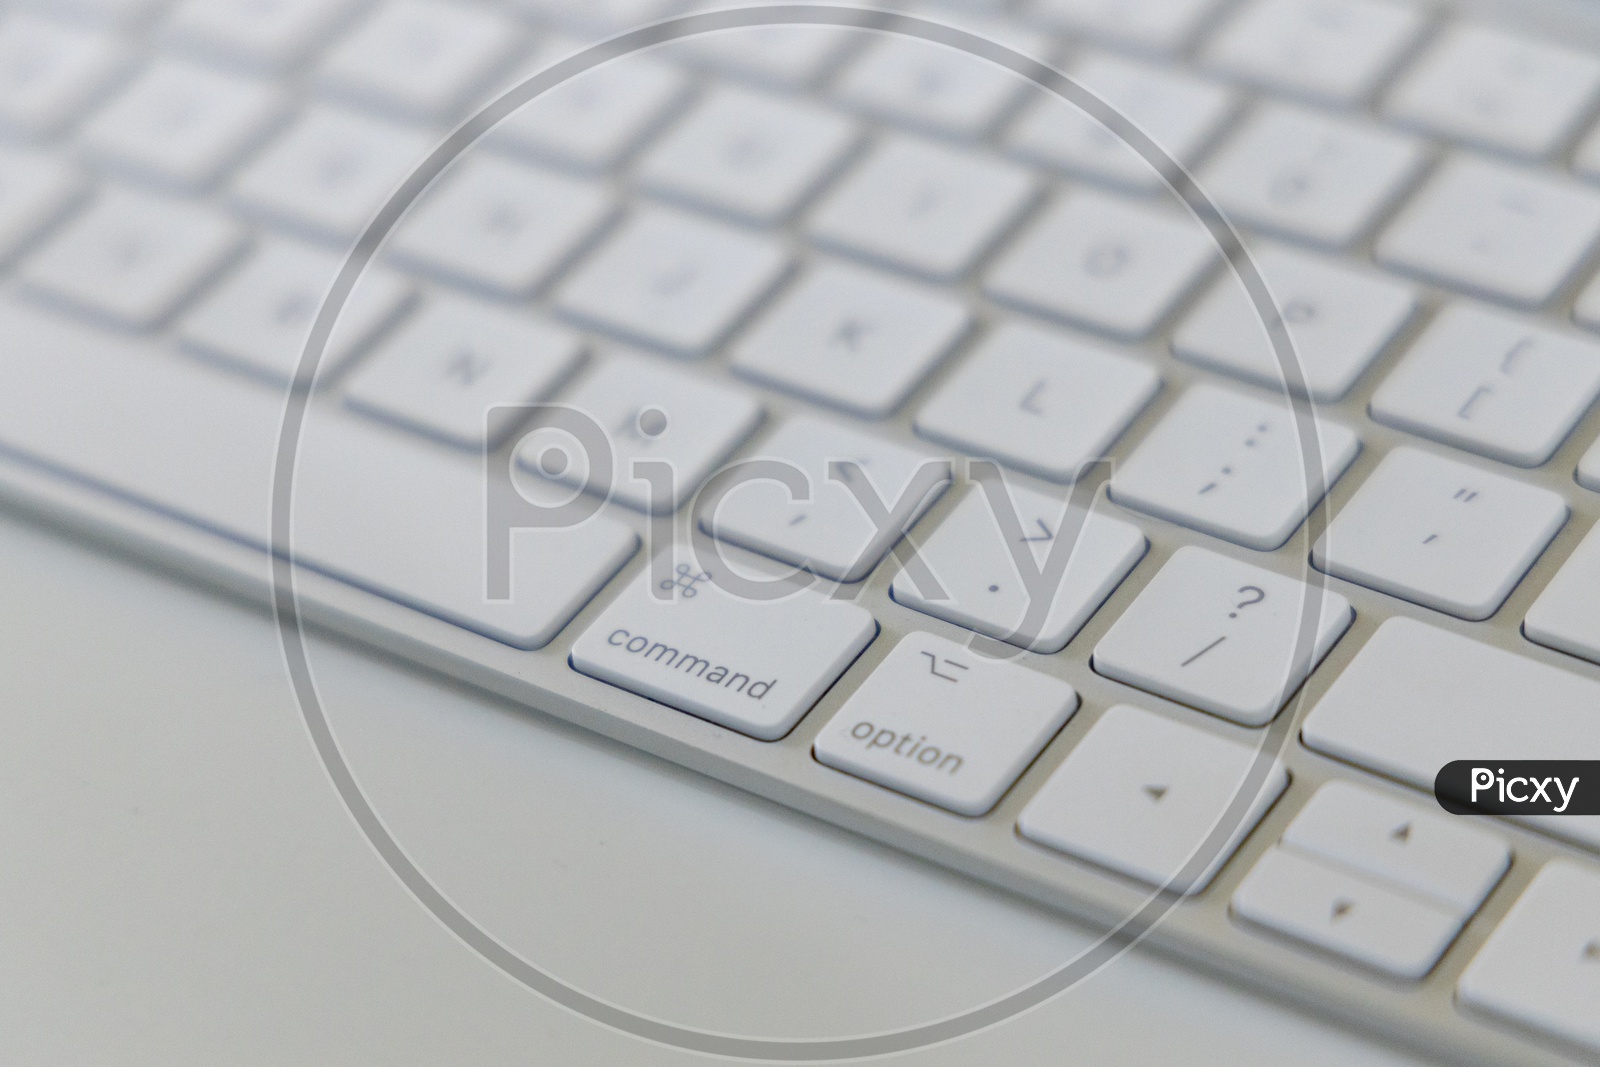 Command  Button Or Key  On a Keyboard  Closeup  on White Desk Background